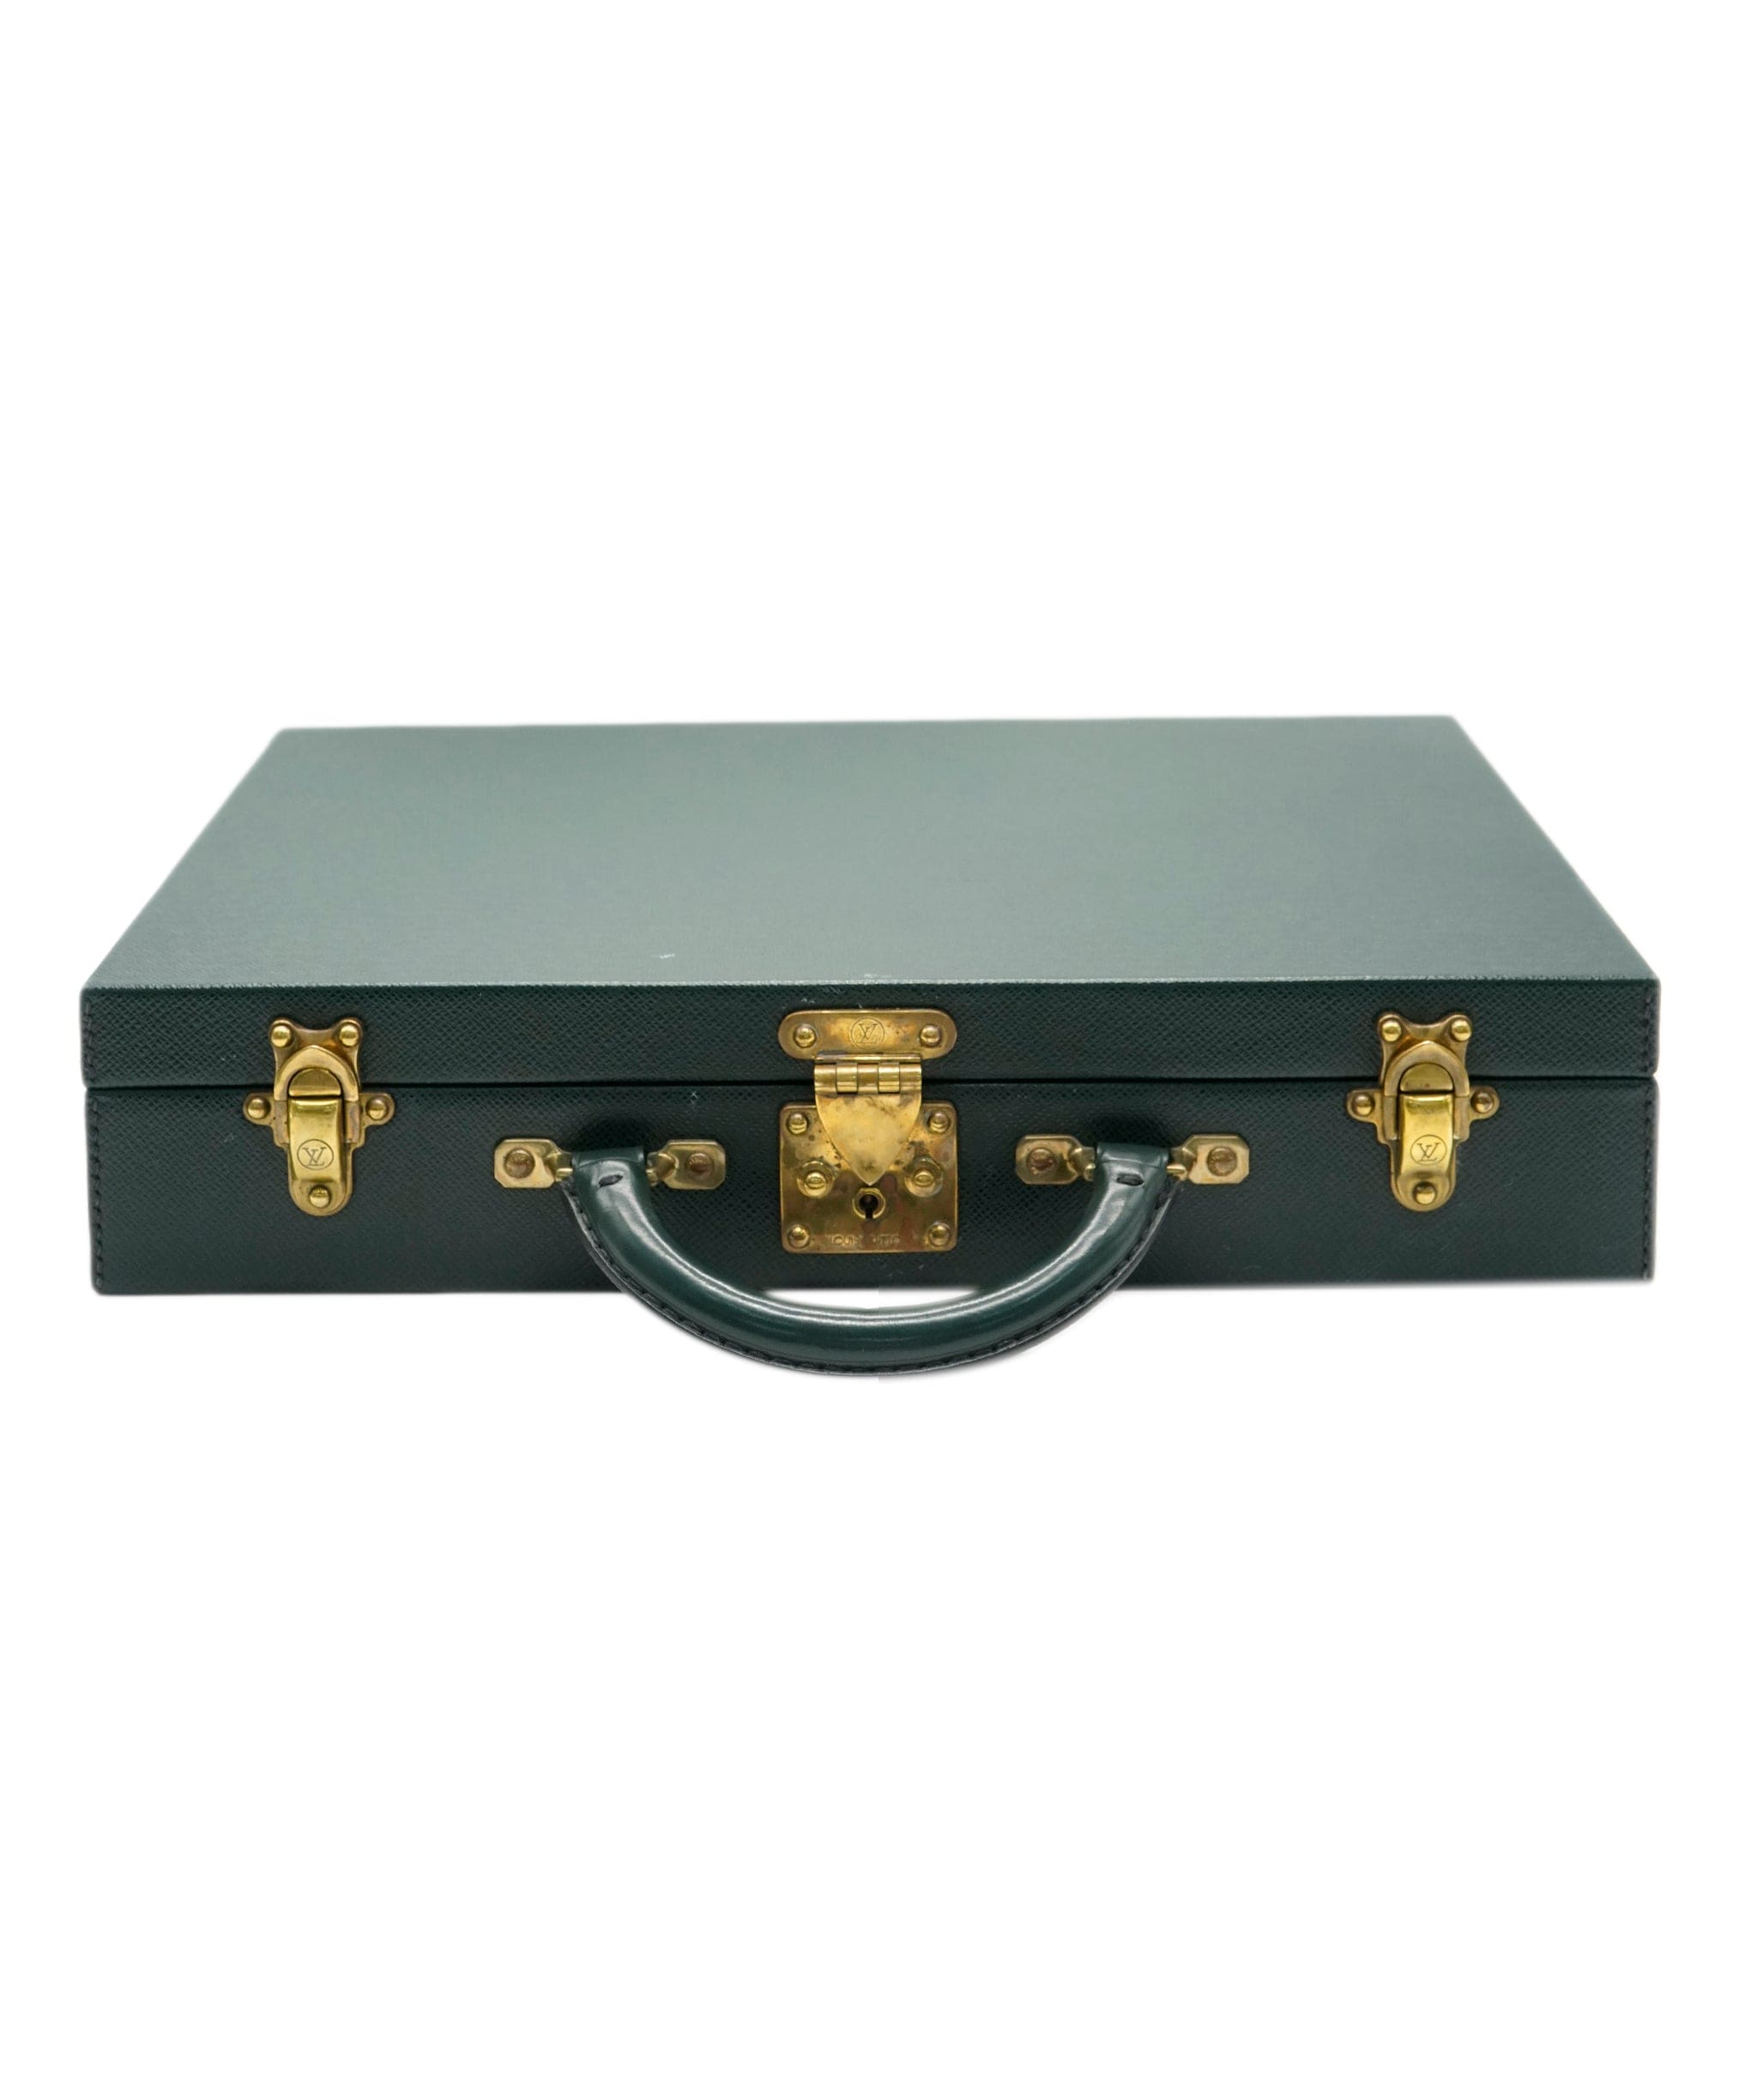 LV Diplomat Forest Green Trunk with GHW - ASL10235